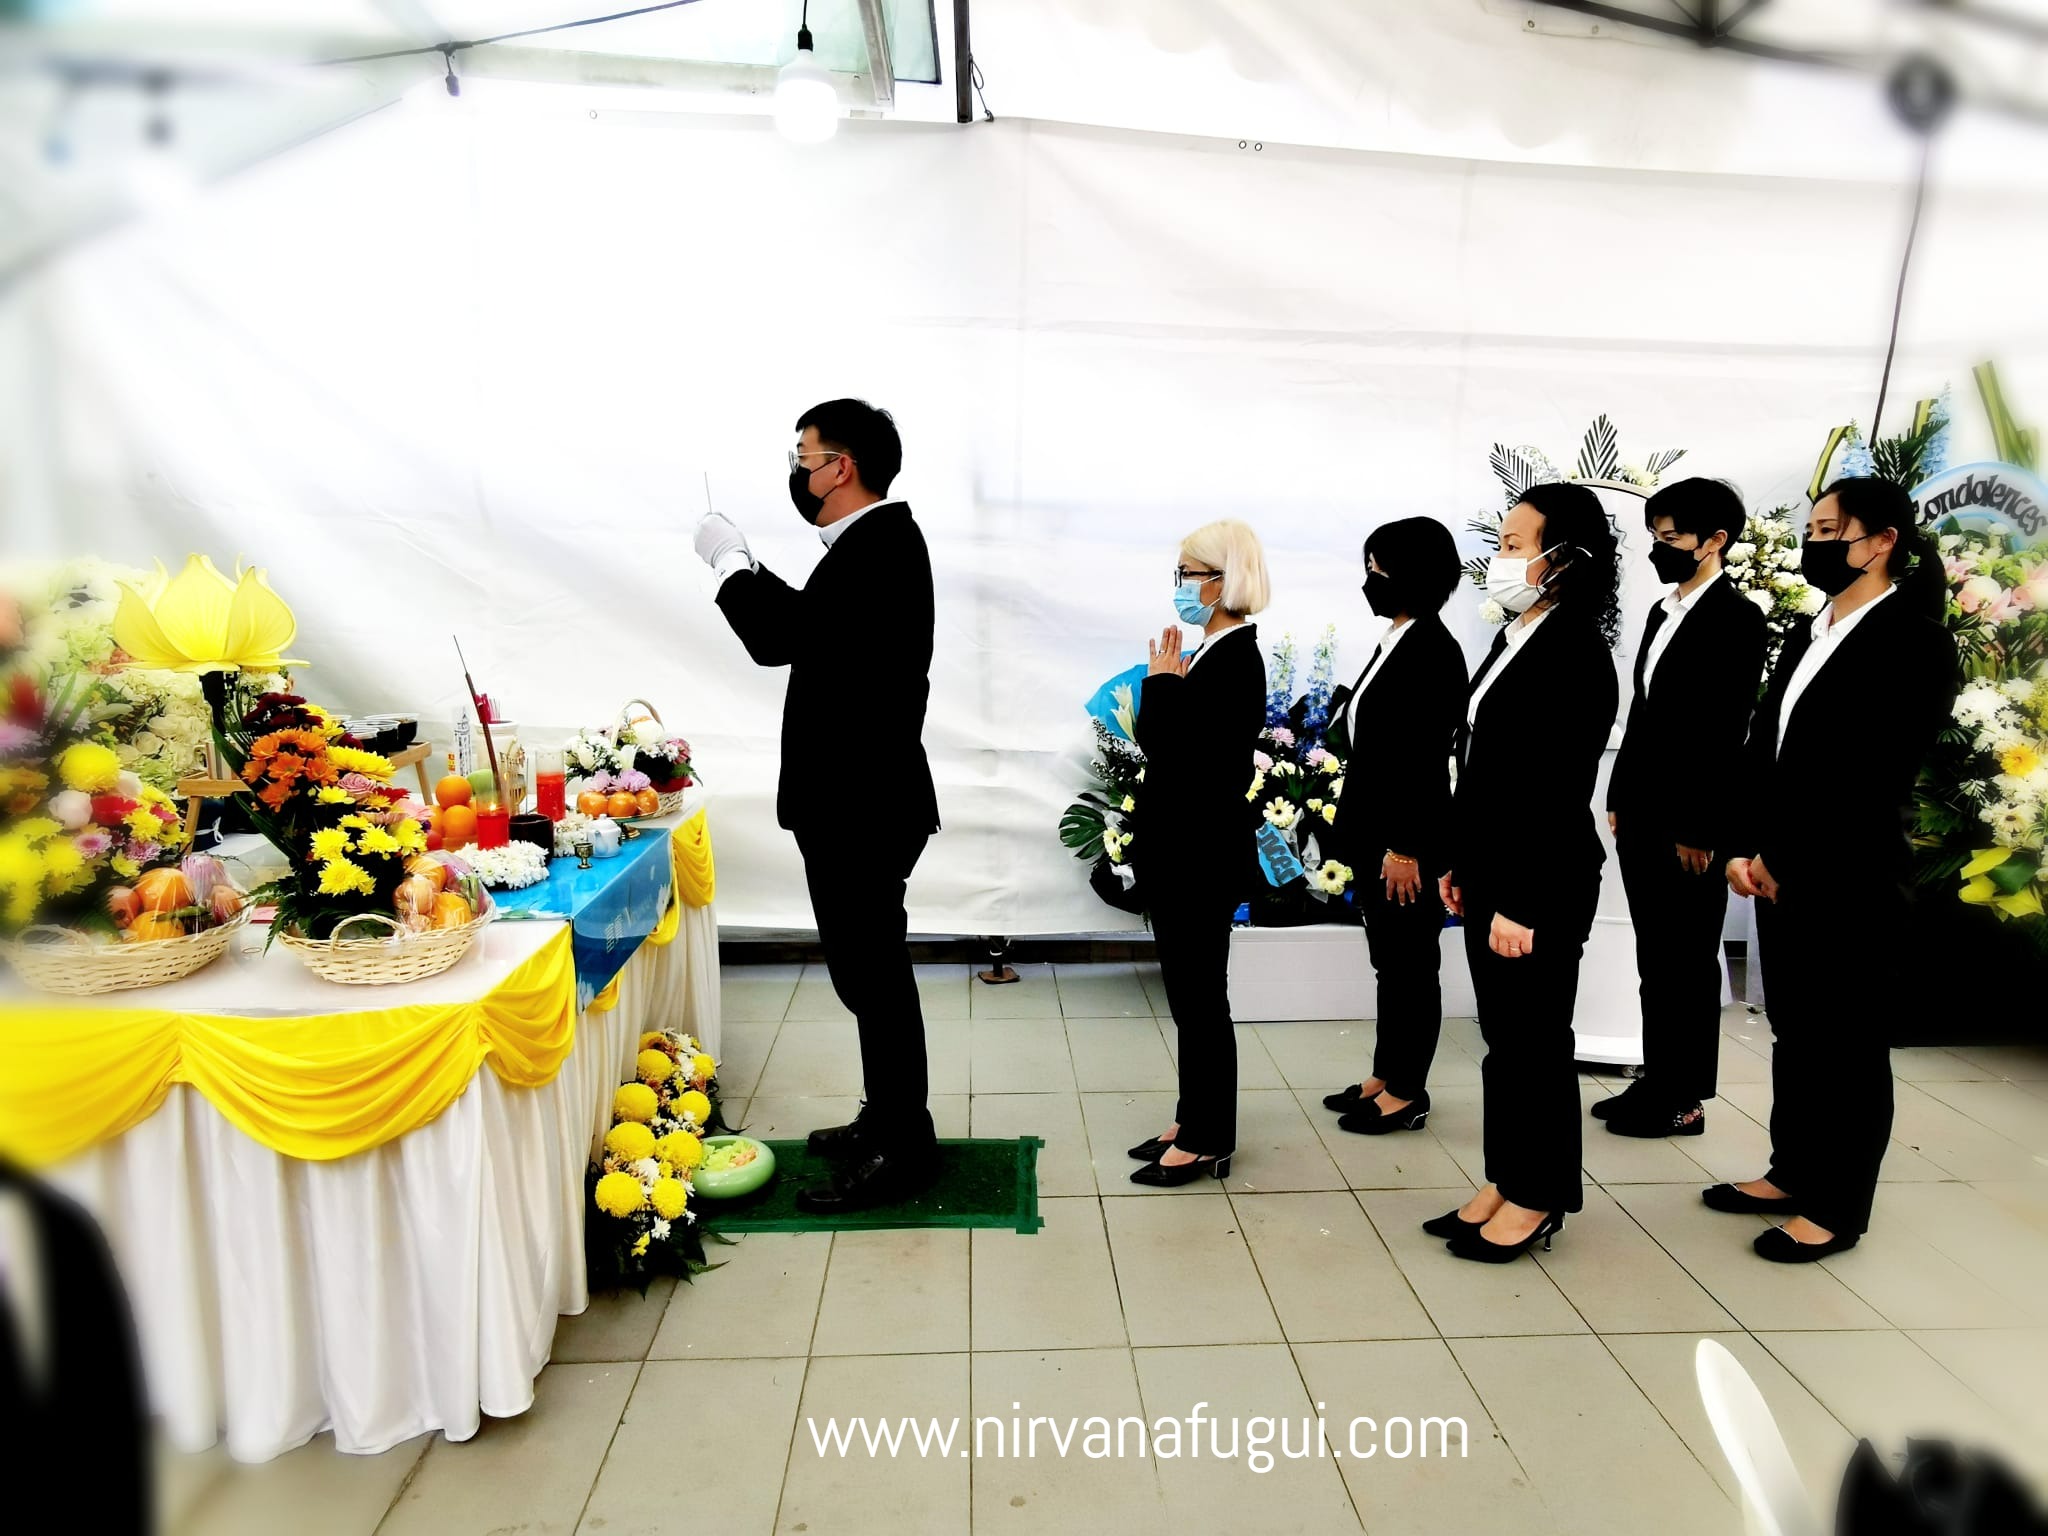 Good Funeral Services make sure funeral is carried out smoothly and professionally